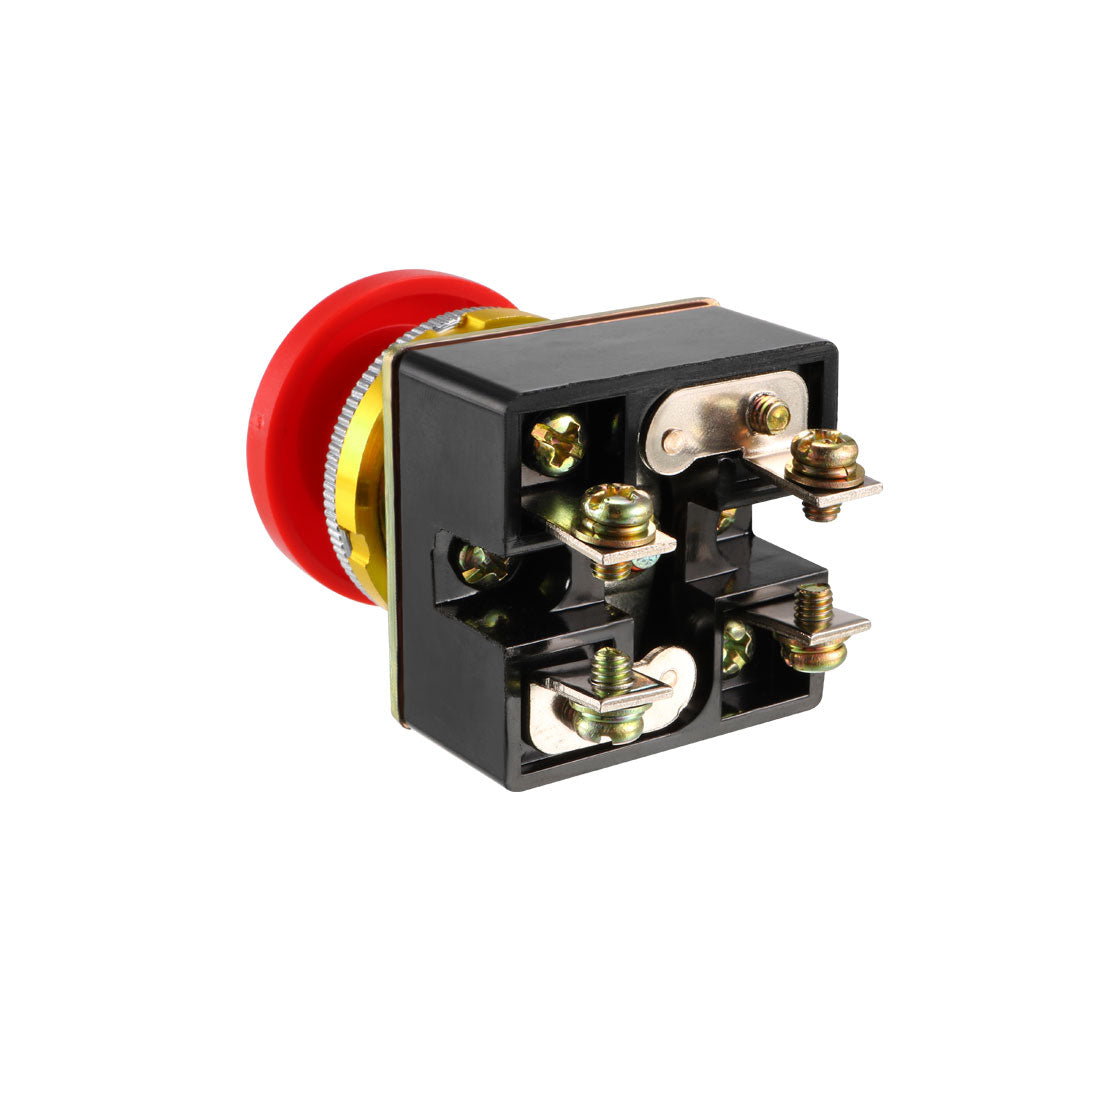 uxcell Uxcell Push Bottom Switch Red Momentary AC 380V 5A Mushroom Head Pushbutton Switches 30mm Panel Mount 2pcs